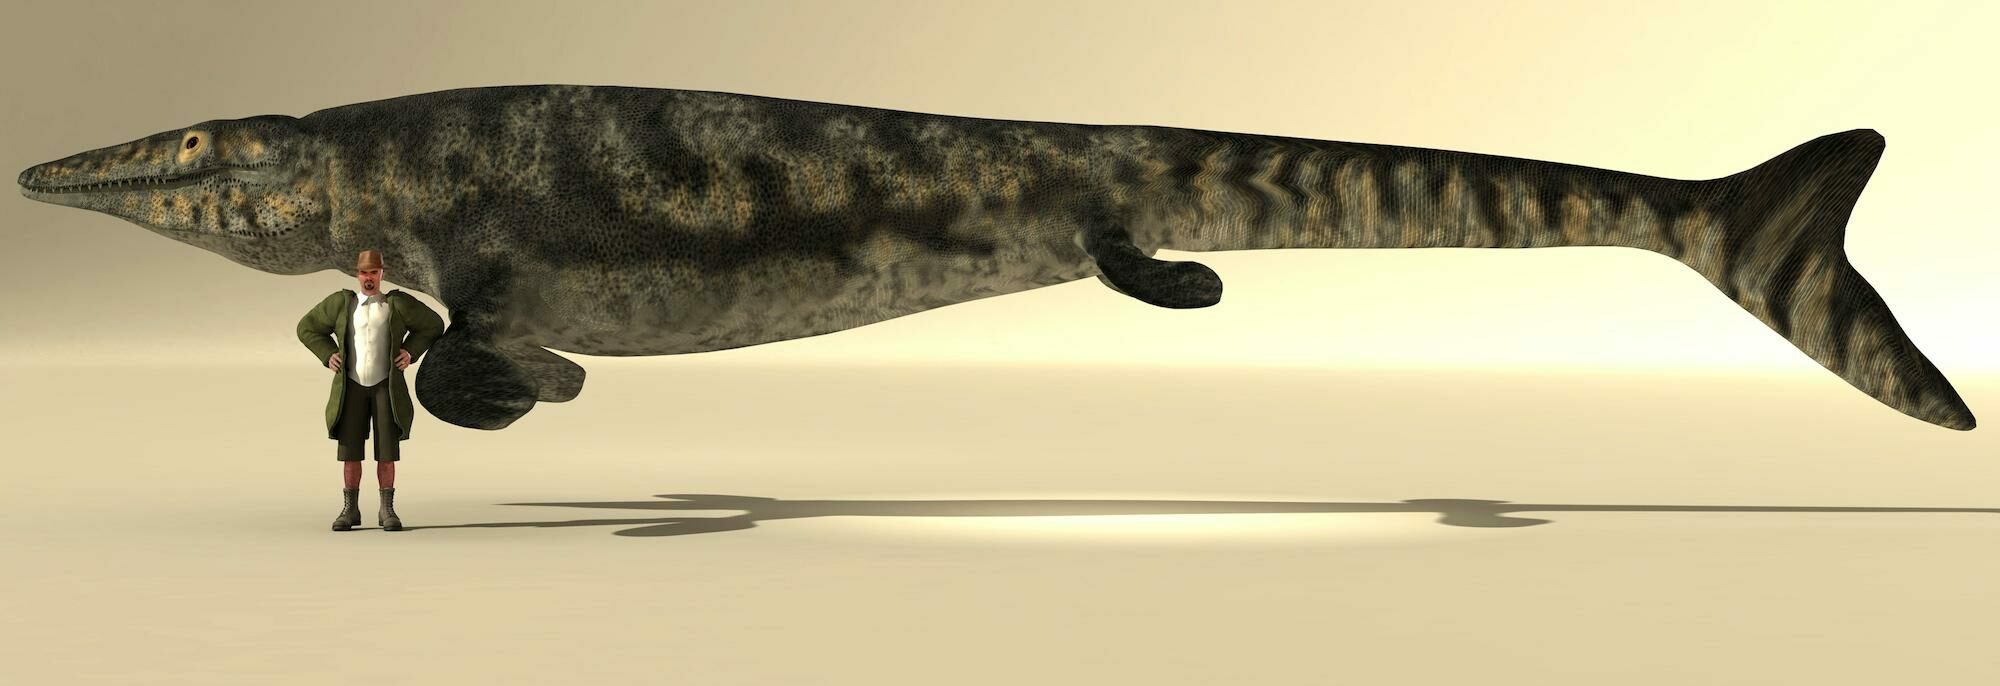 How Large Did Mosasaurs Get? 